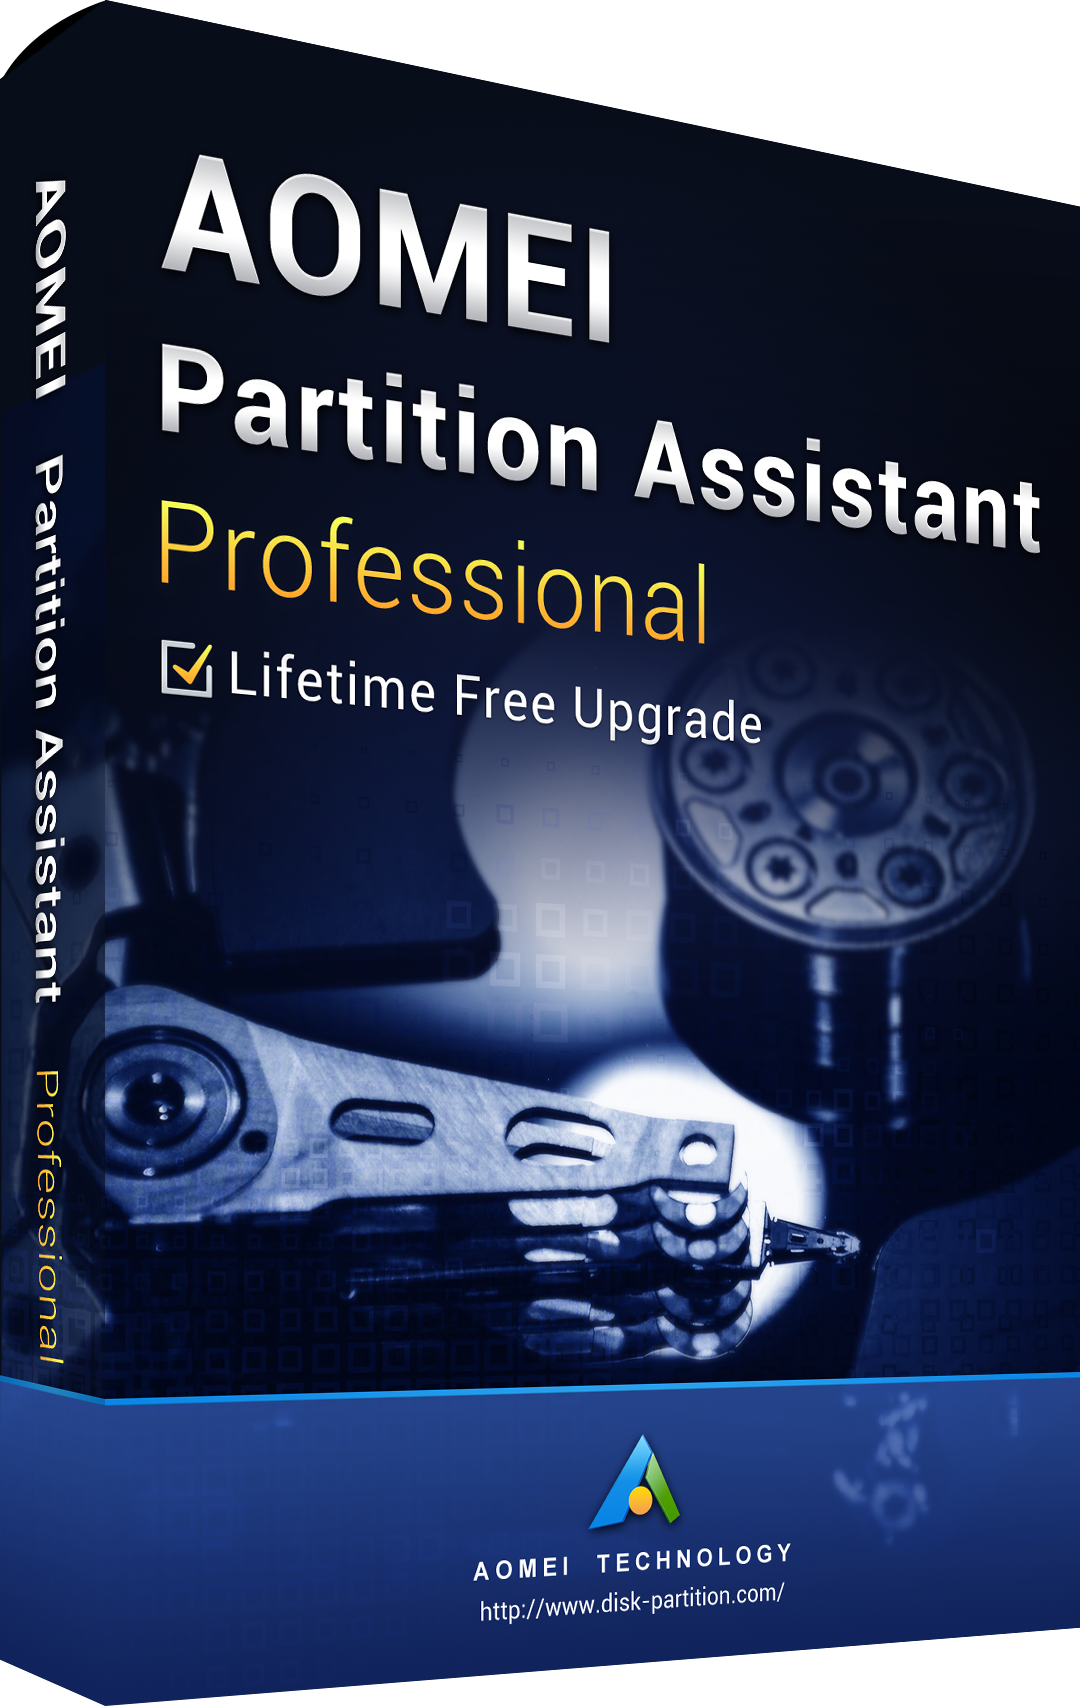 AOMEI Partition Assistant Professional + Free Lifetime Upgrades 8.6 Eidtion Key Global